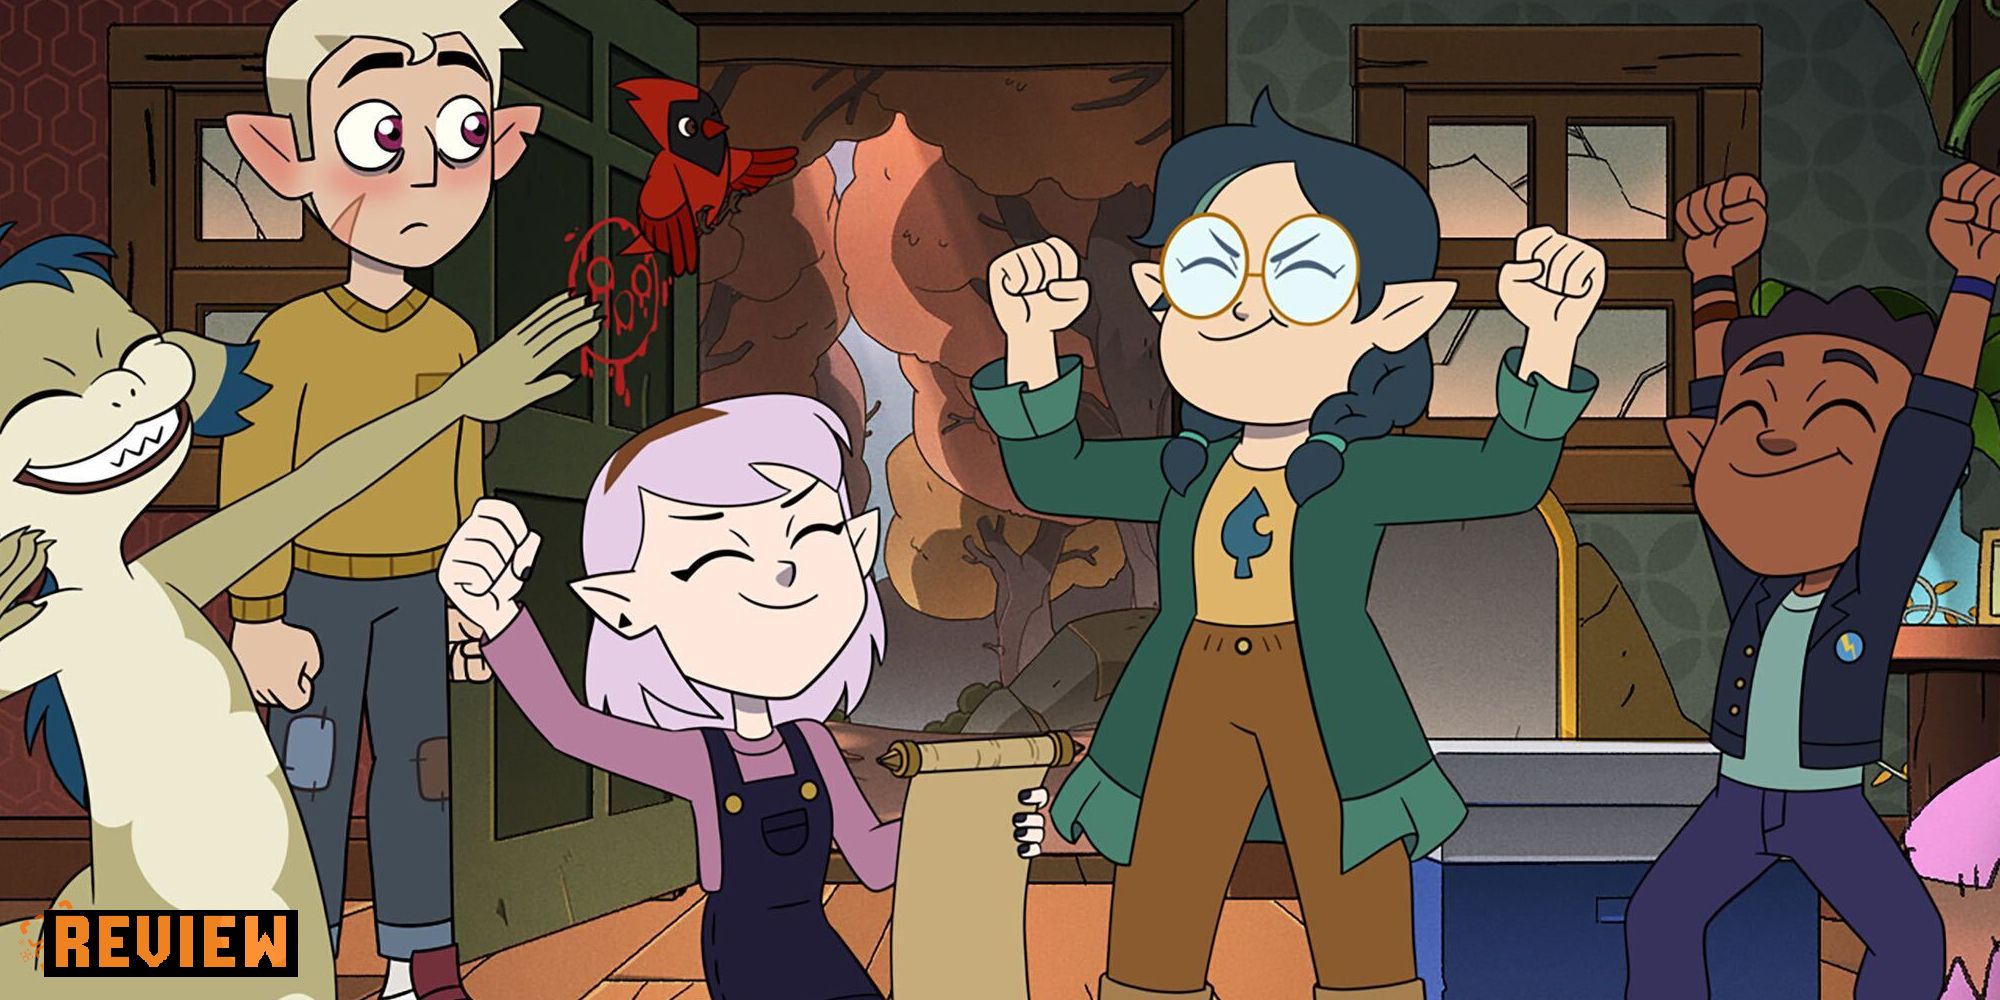 You're a star! callback to Season 1 Episode 3), The Owl House